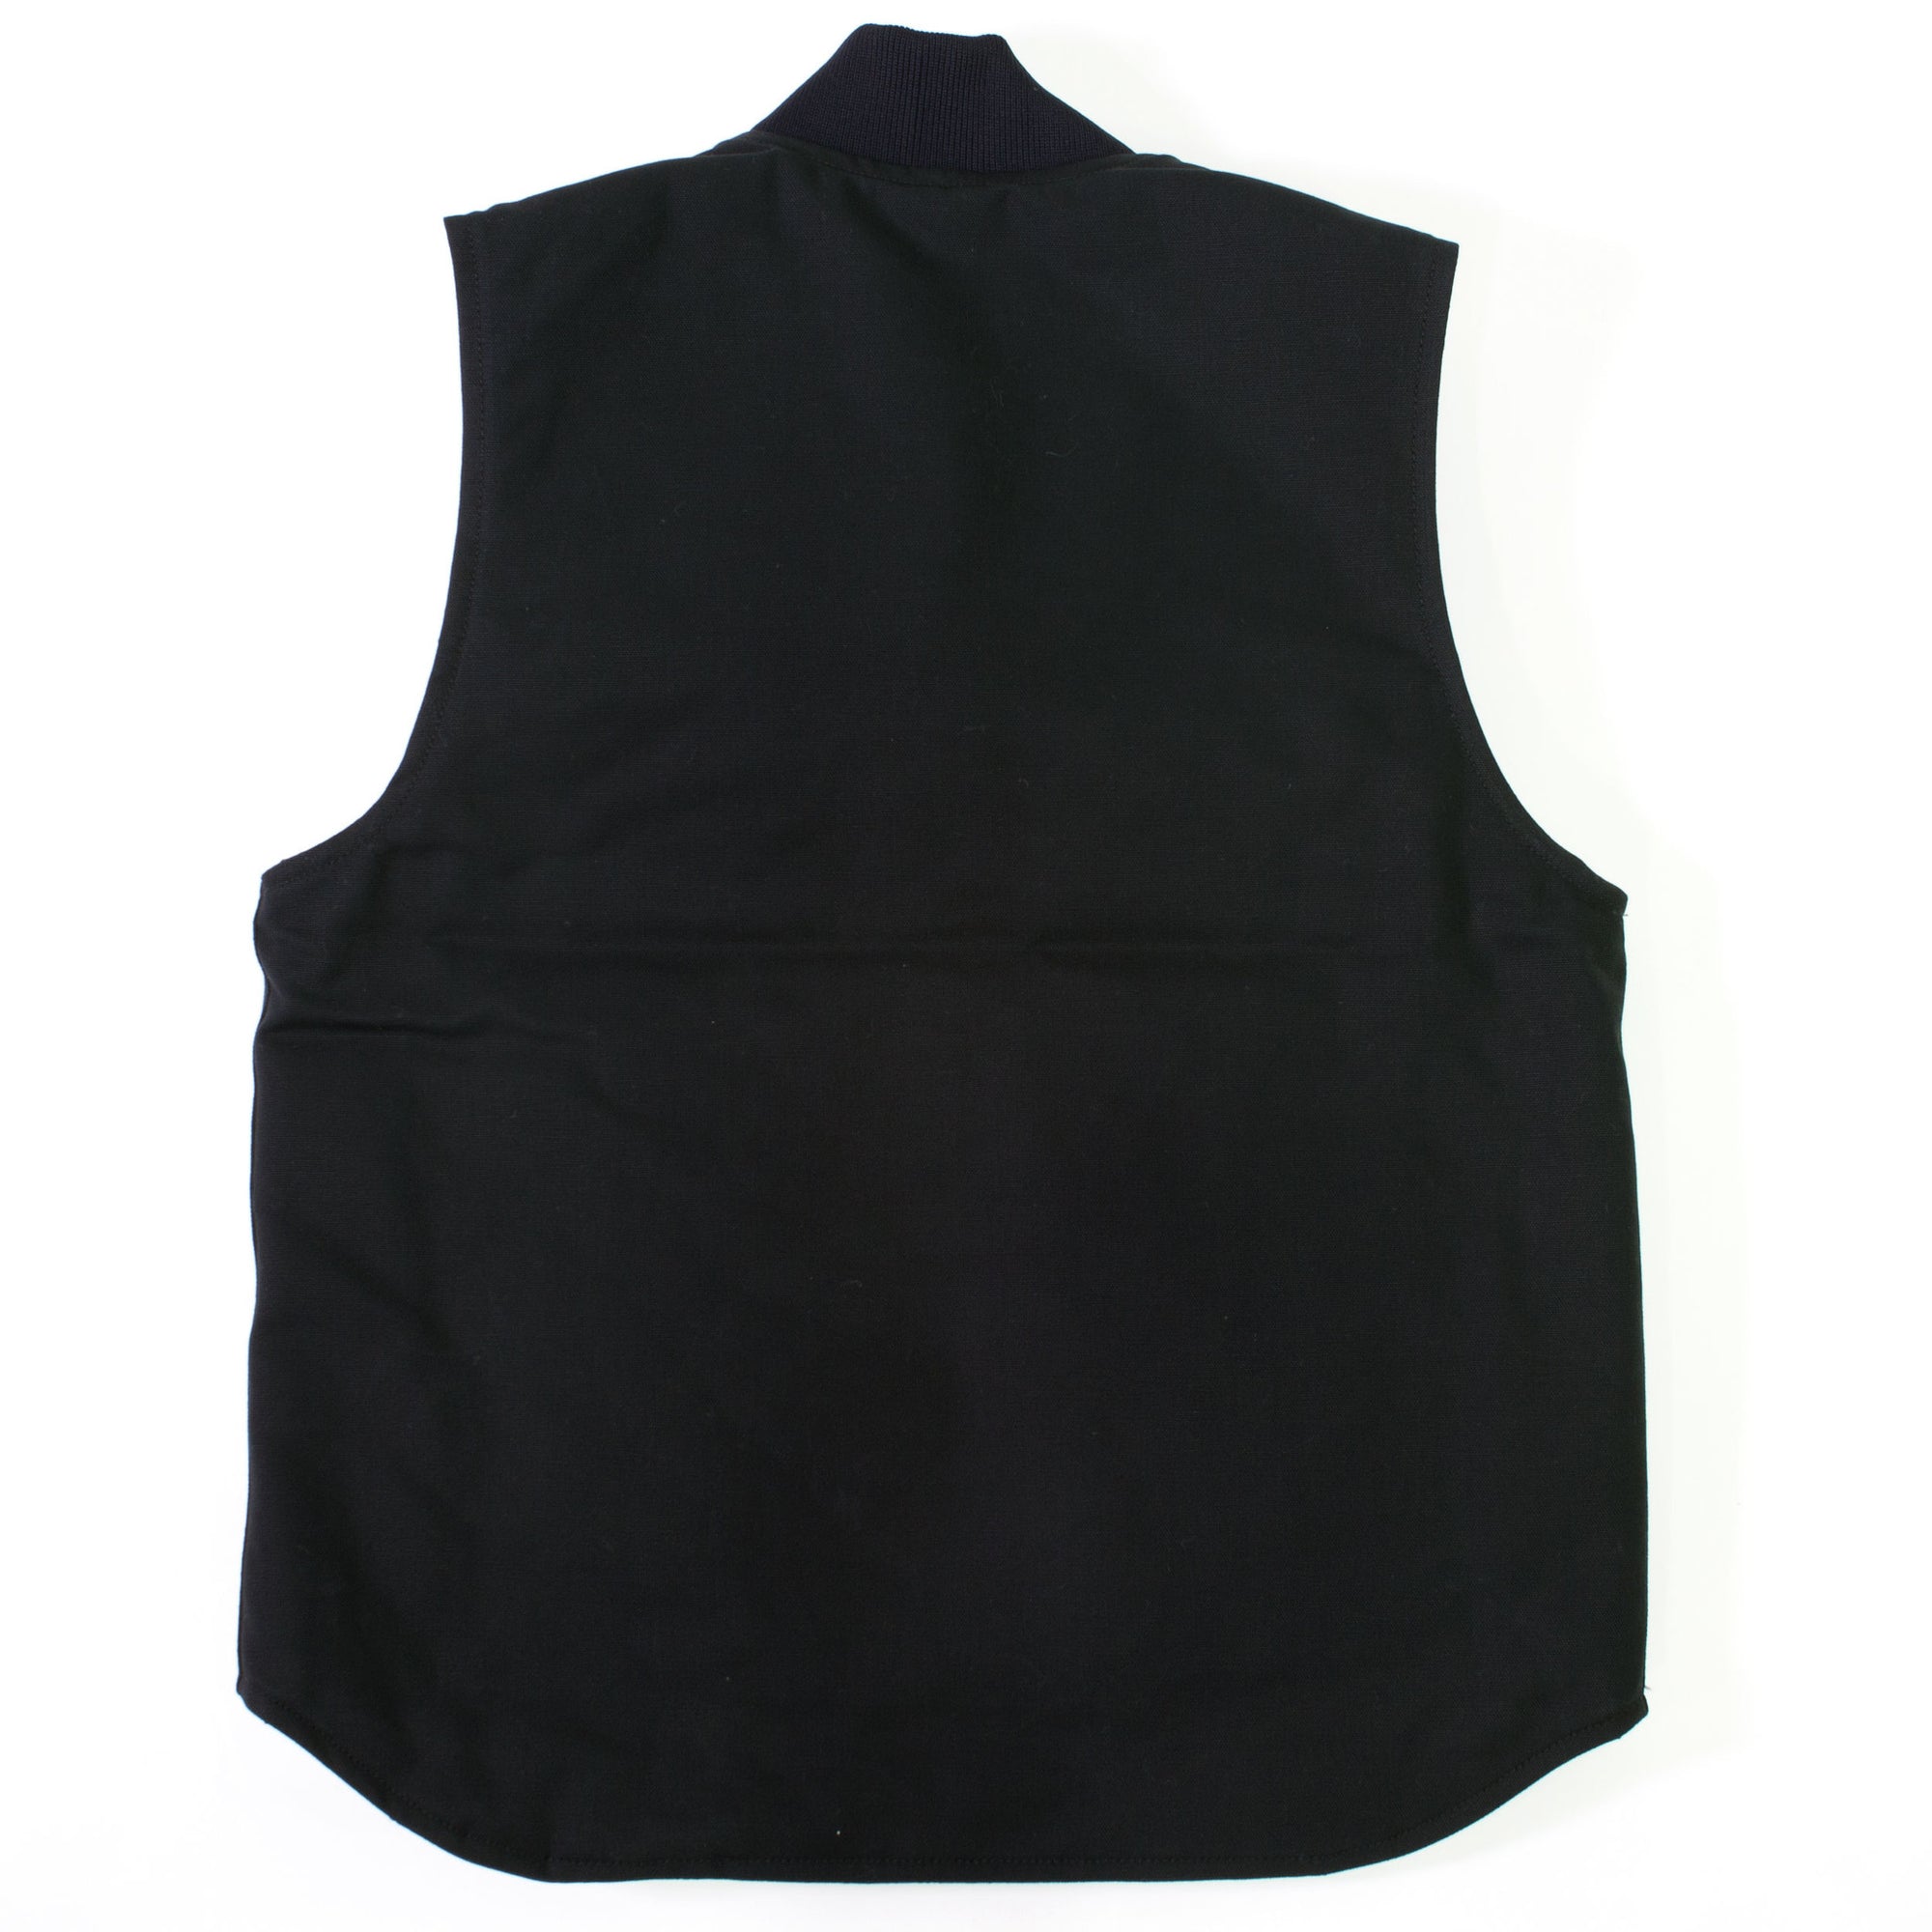 Limited Quantity Available! - Ural Carhartt Vest